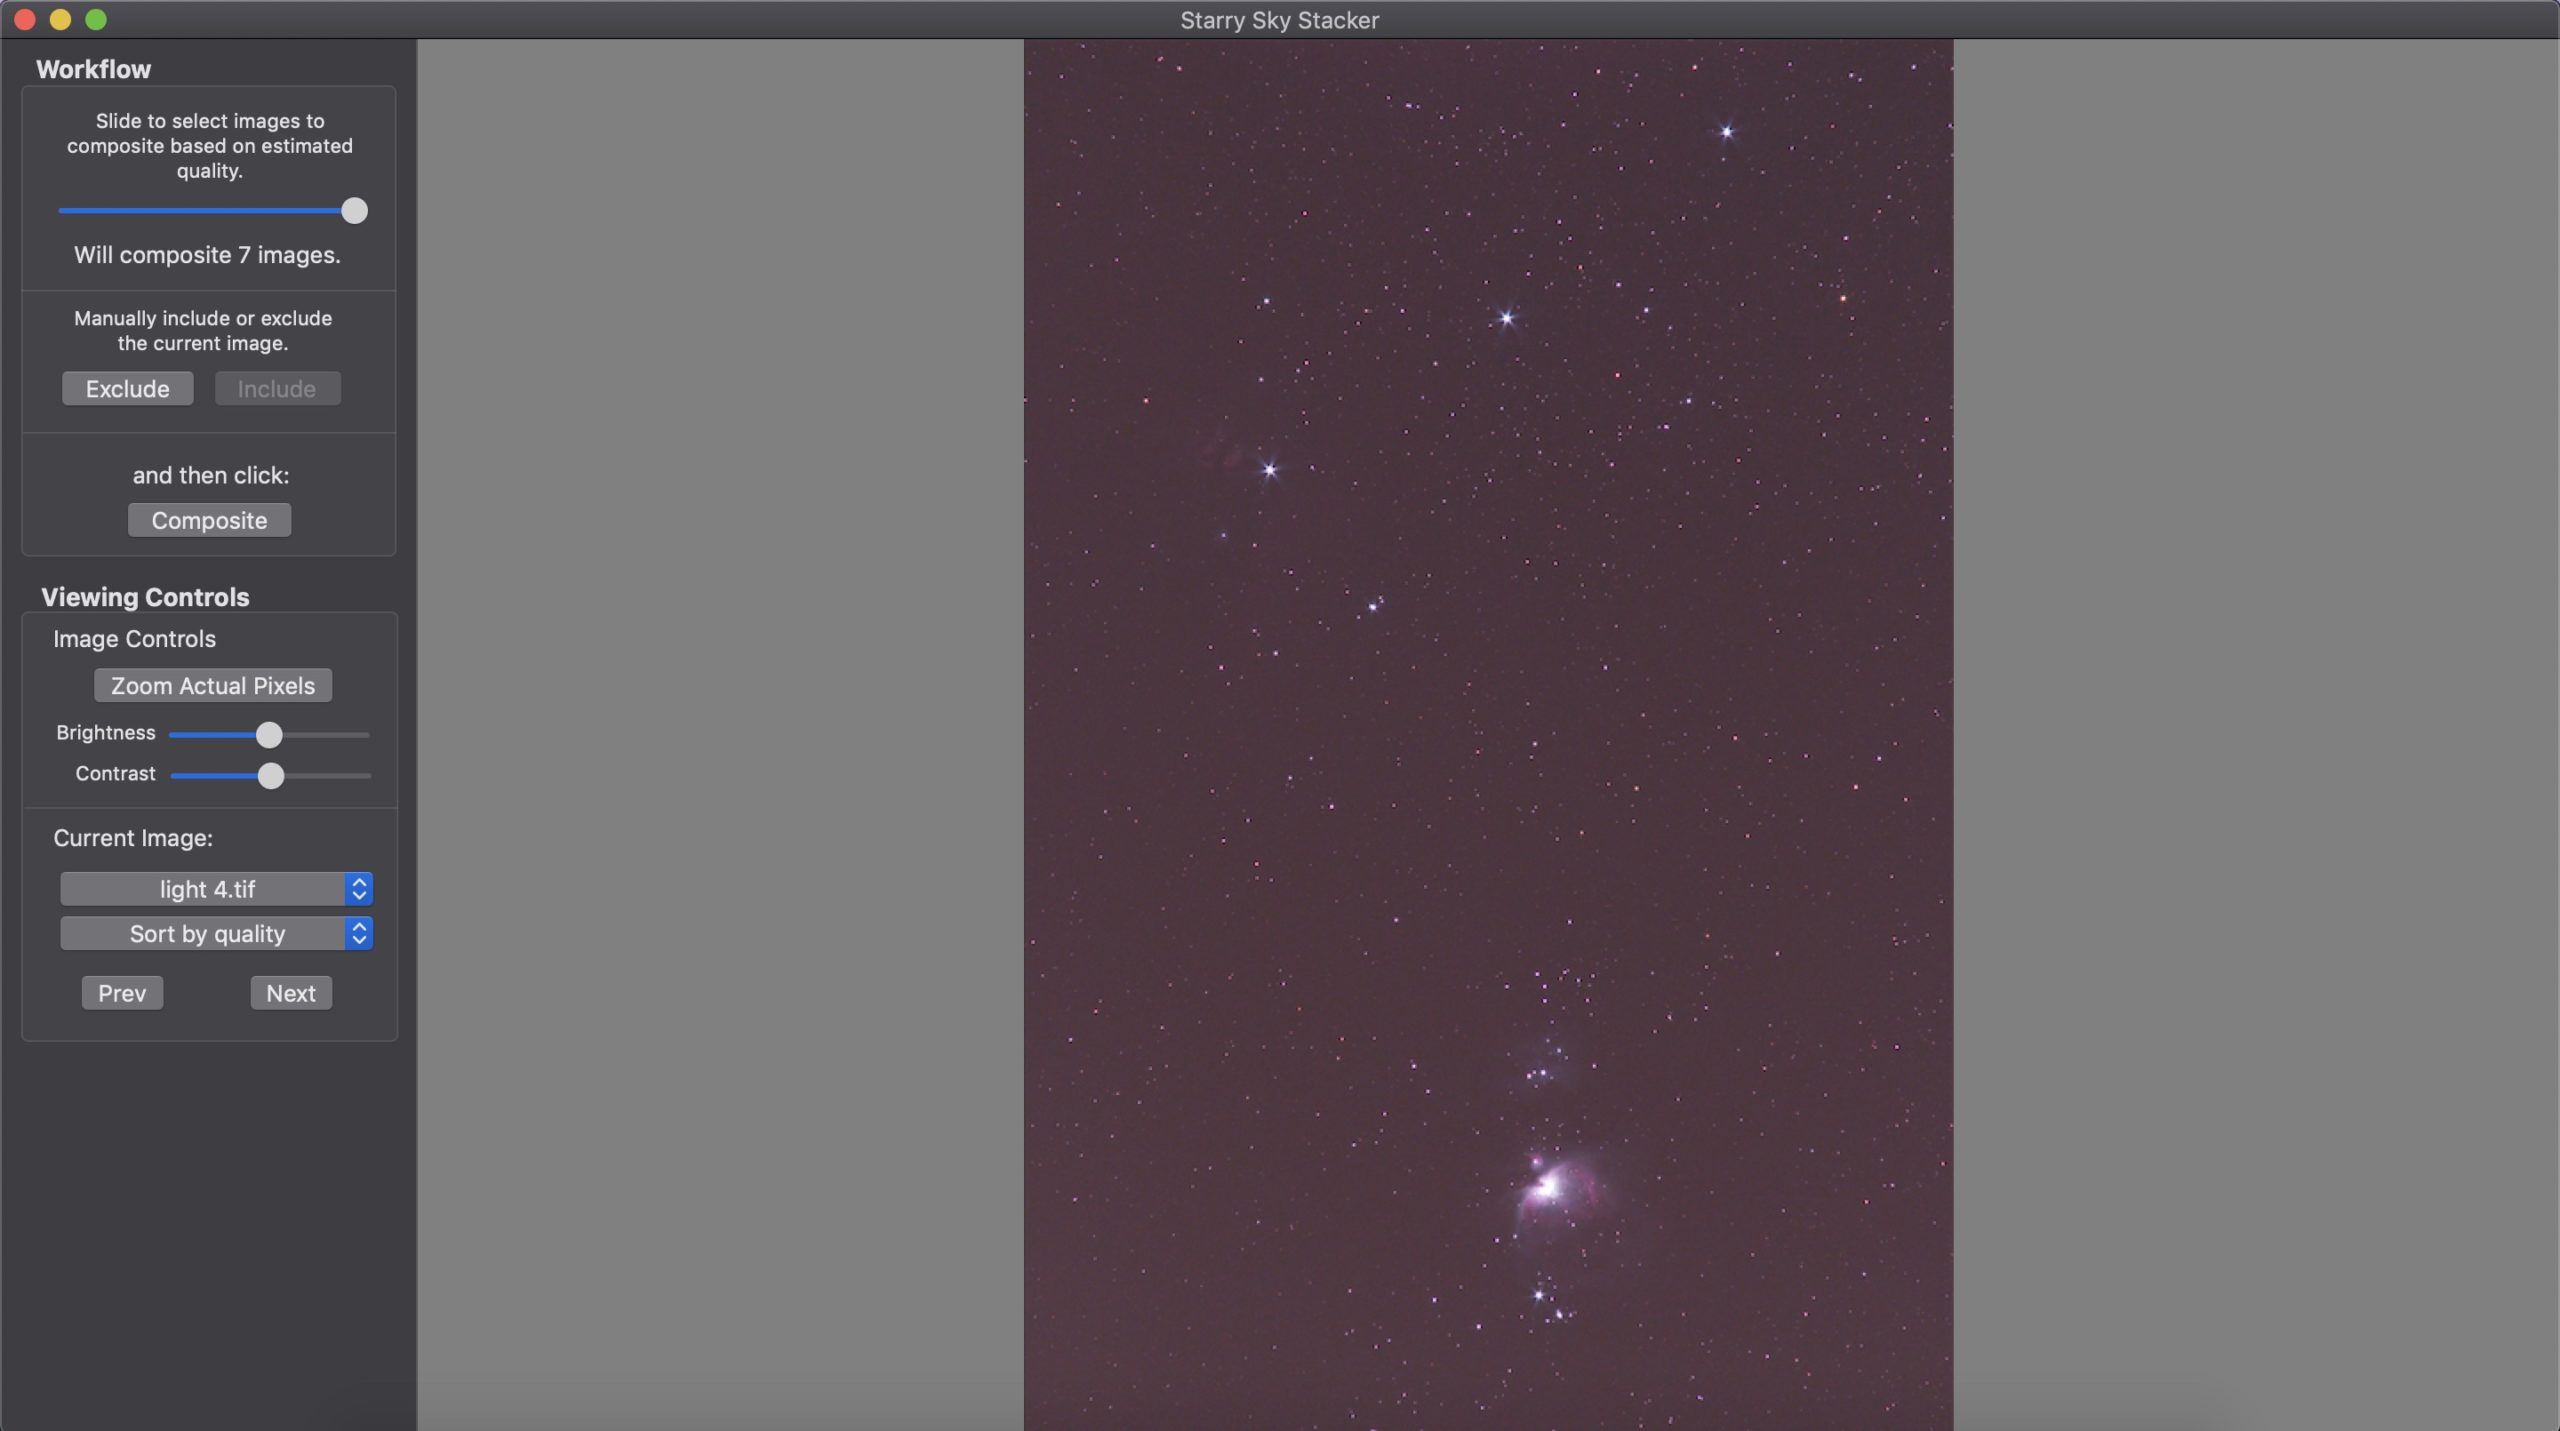 Single exposures loaded into Starry Sky Stacker